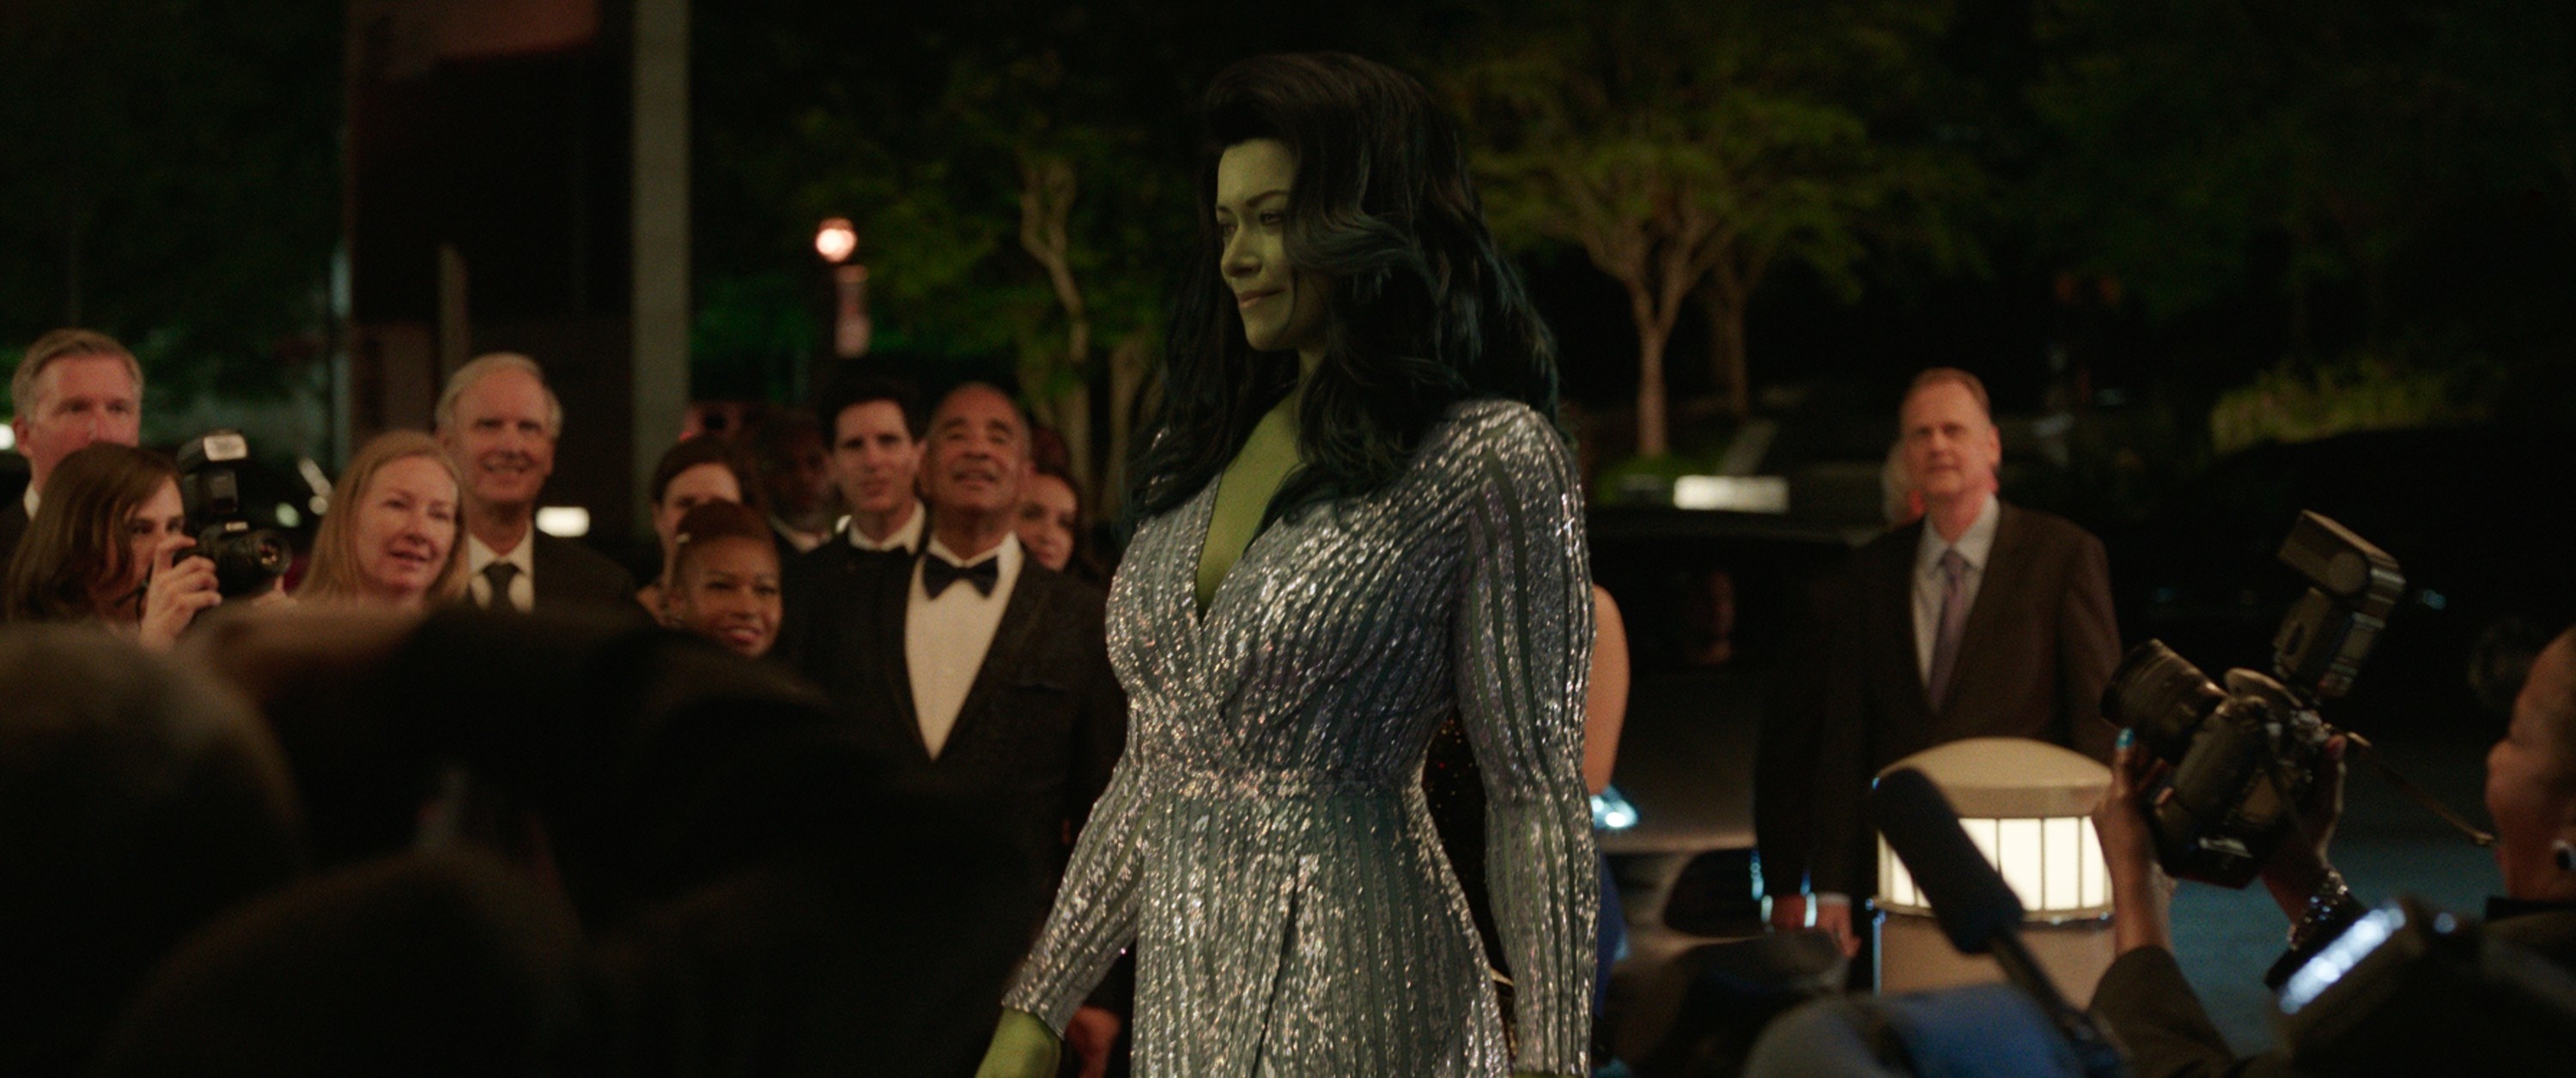 She-Hulk arriving to a party